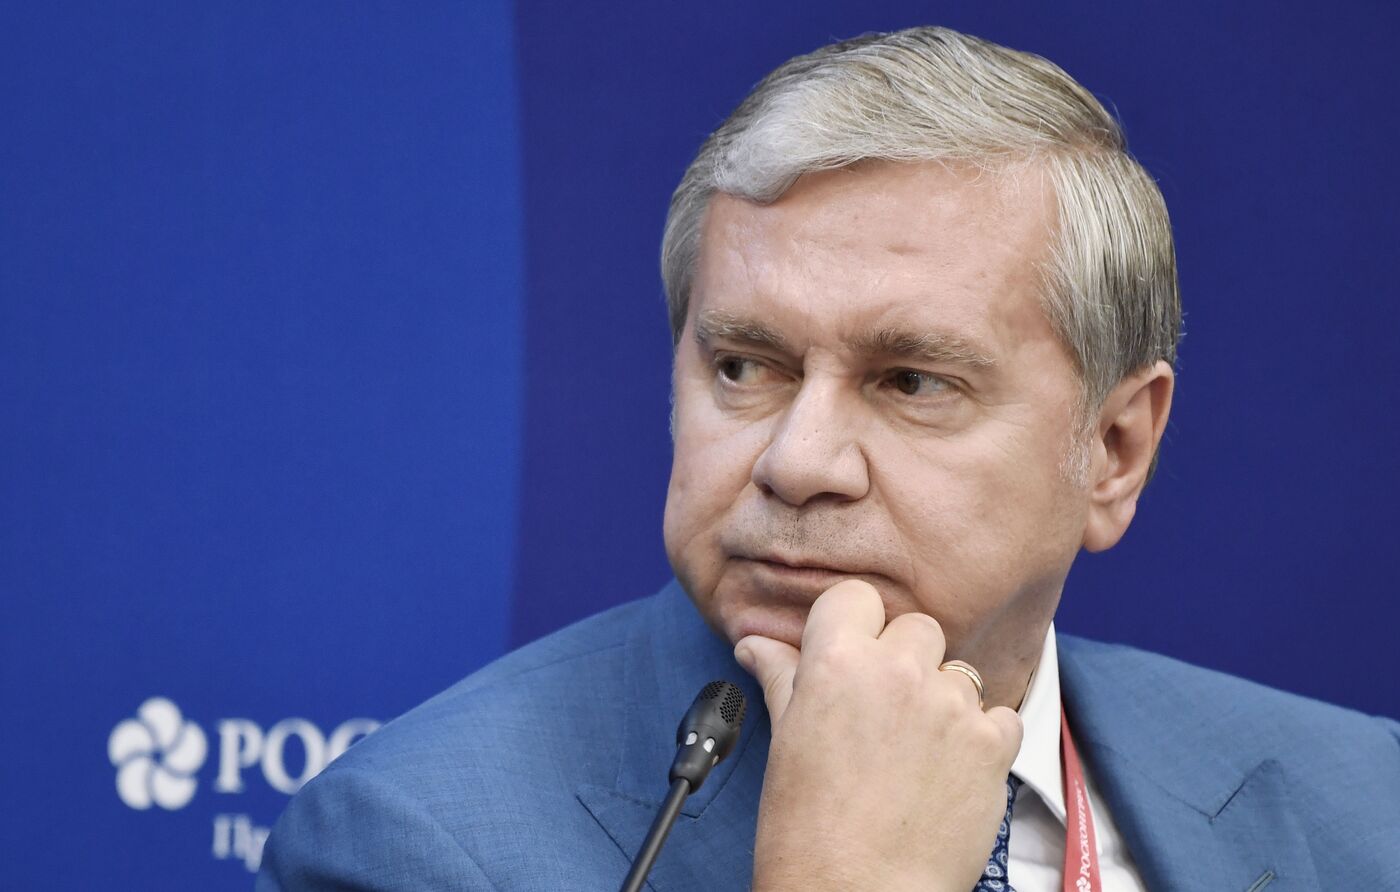 SPIEF-2023. The Language of Diplomacy in a Multipolar World